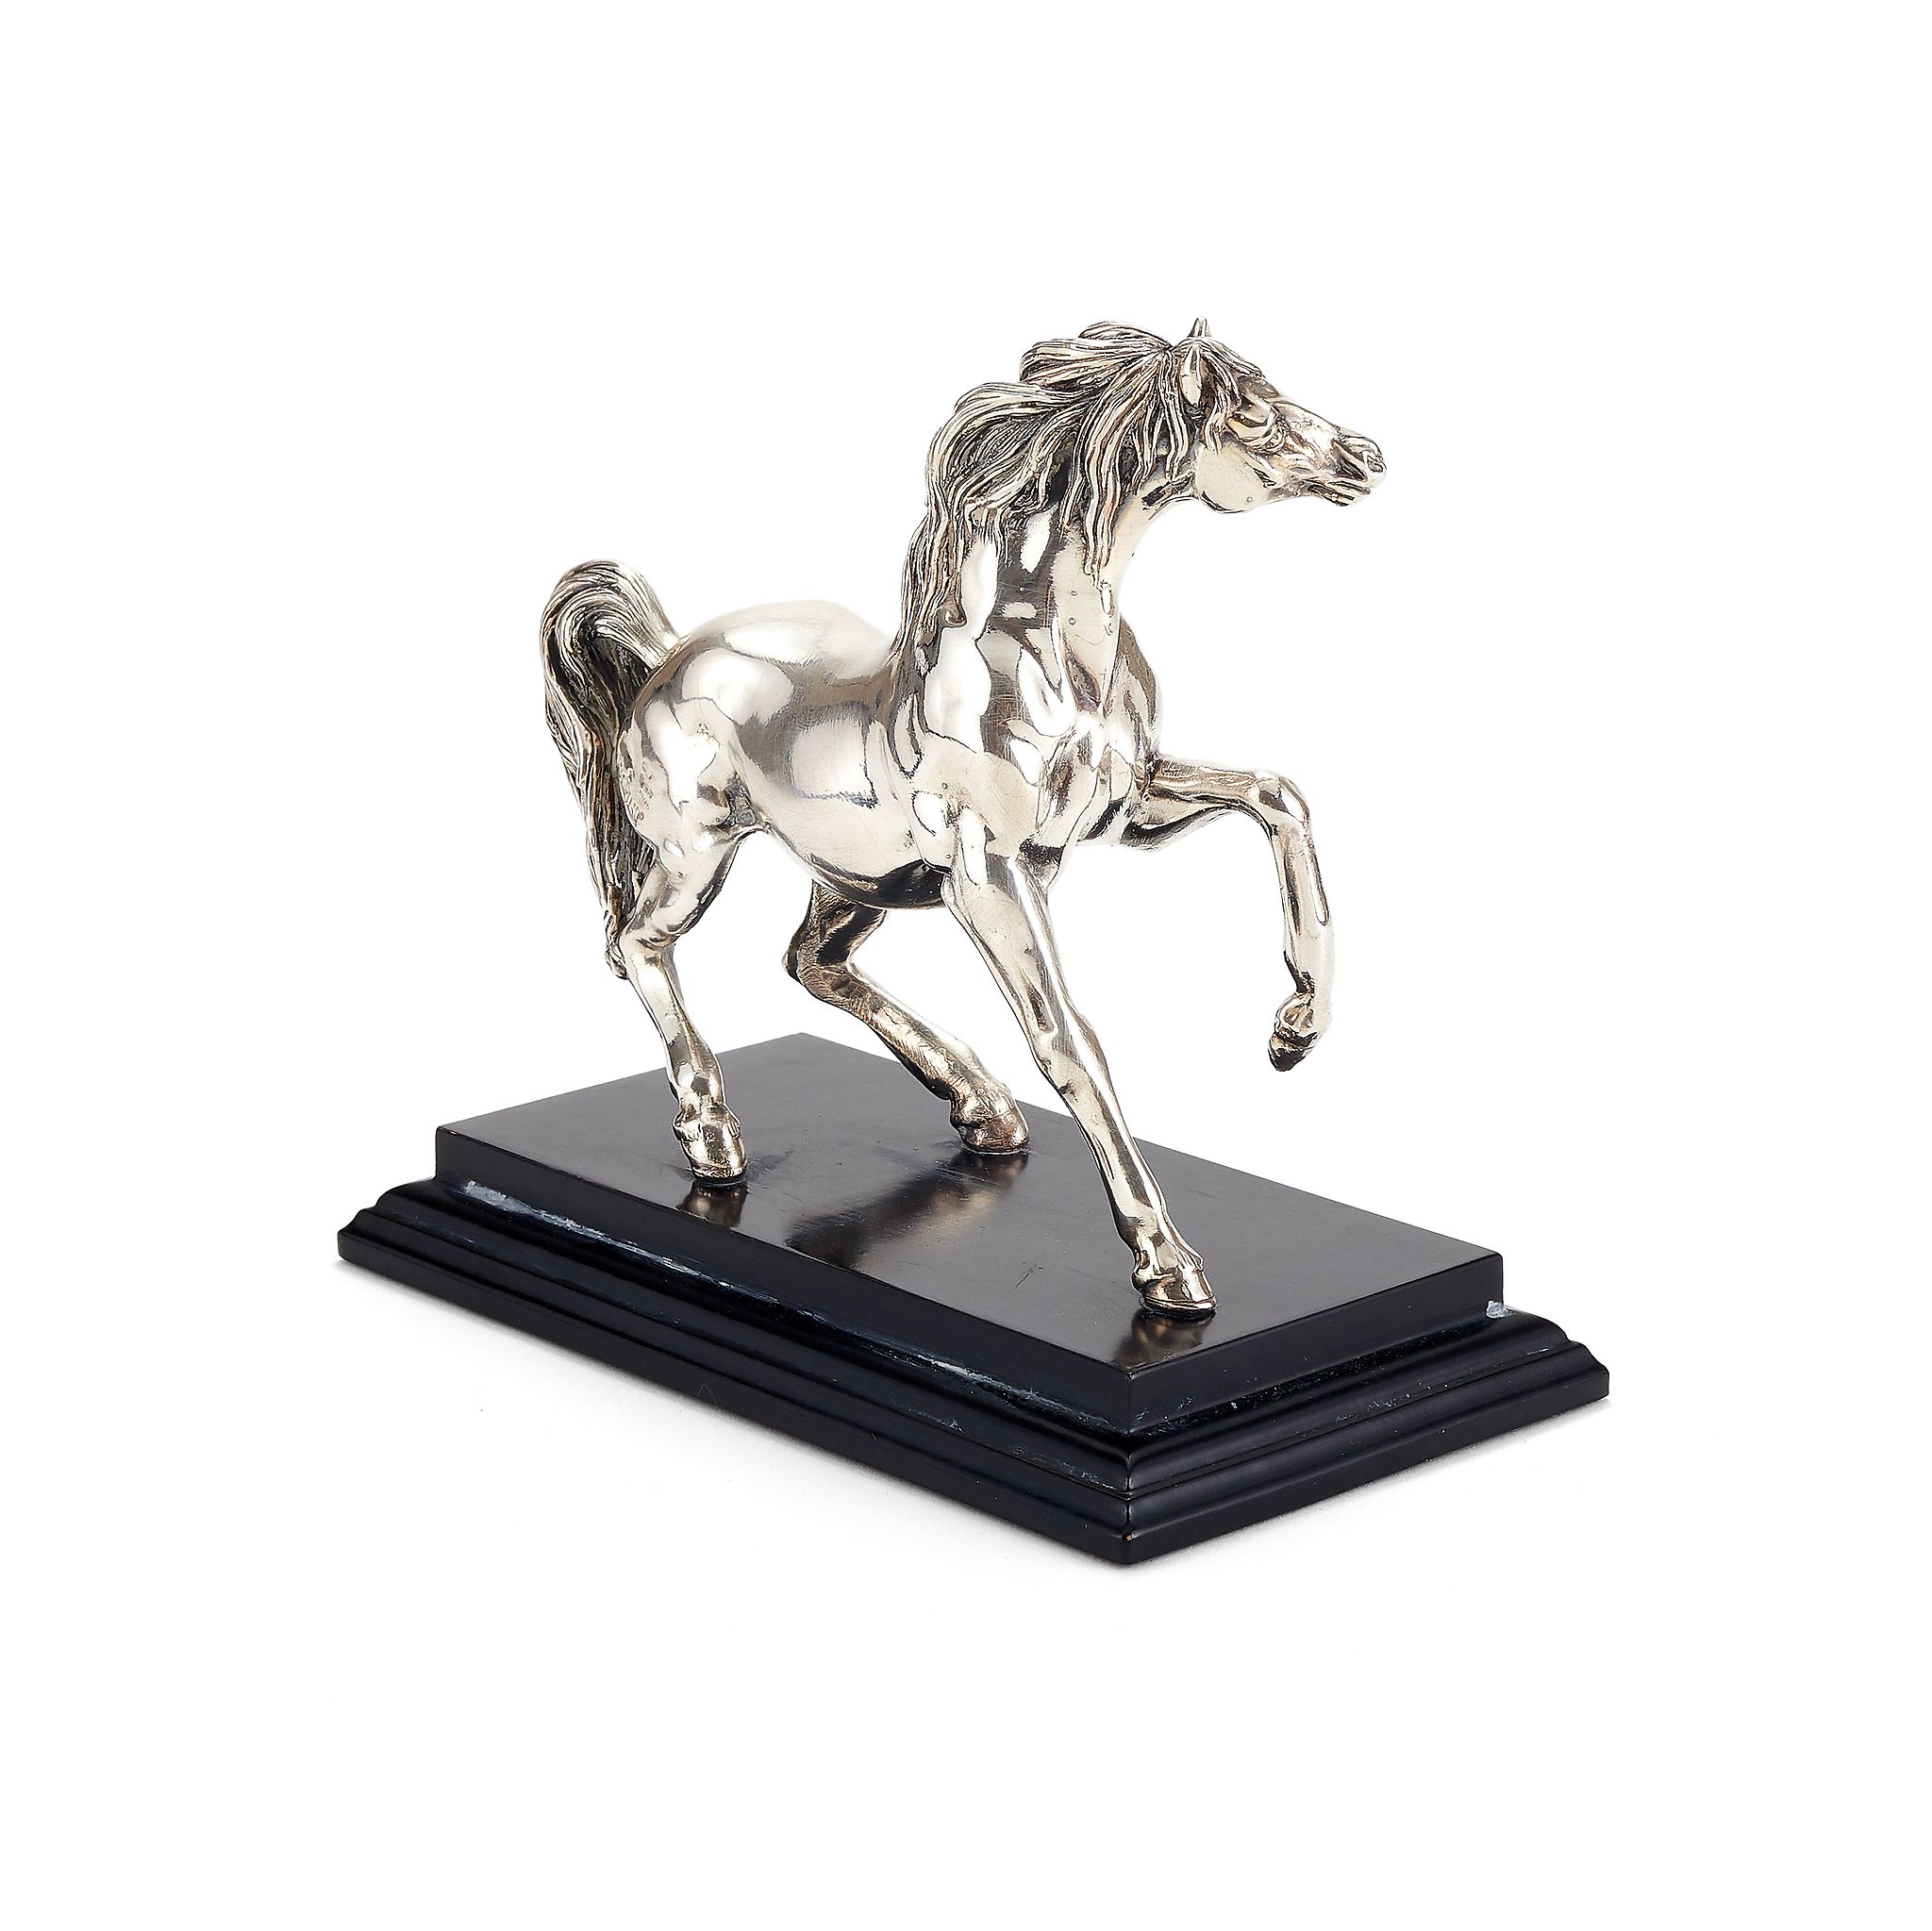 An Italian filled silver model of a horse by Marino, import marked for London 1992, on a black